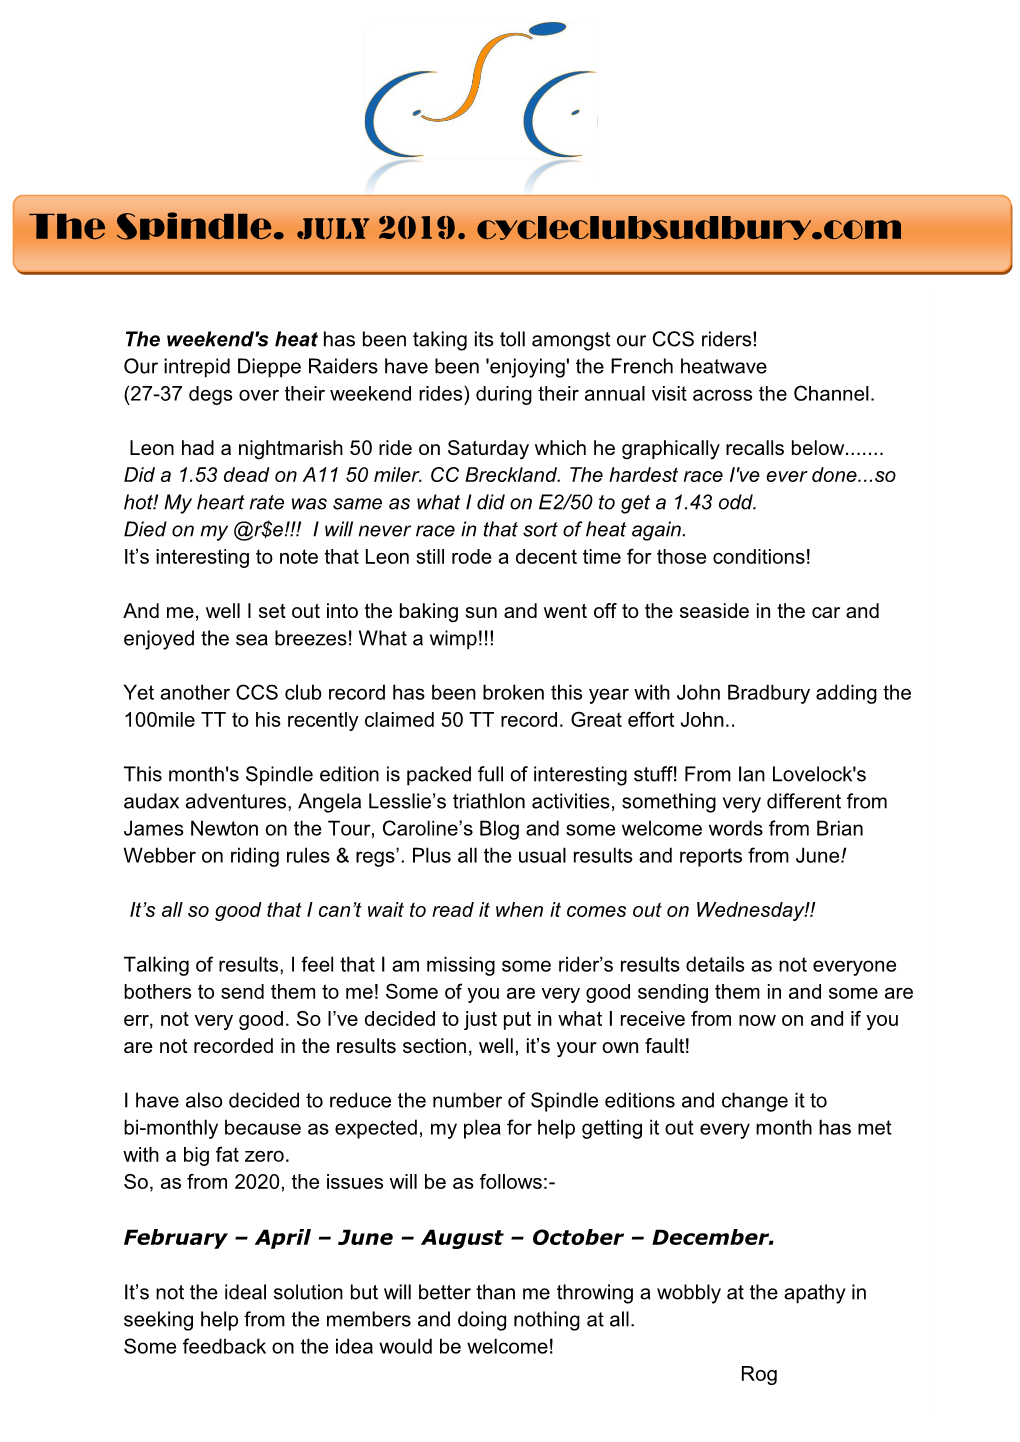 The Spindle. July 2019. Cycleclubsudbury.Com